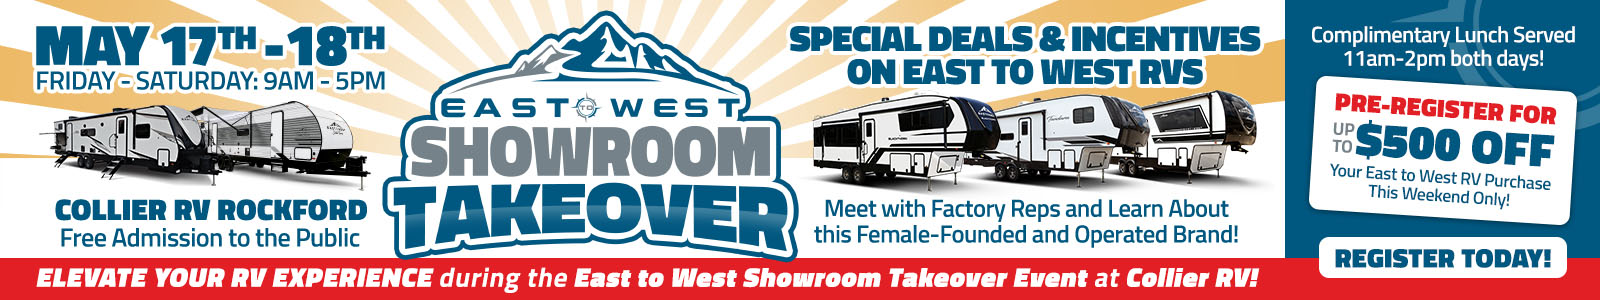 East to West Showroom Takeover